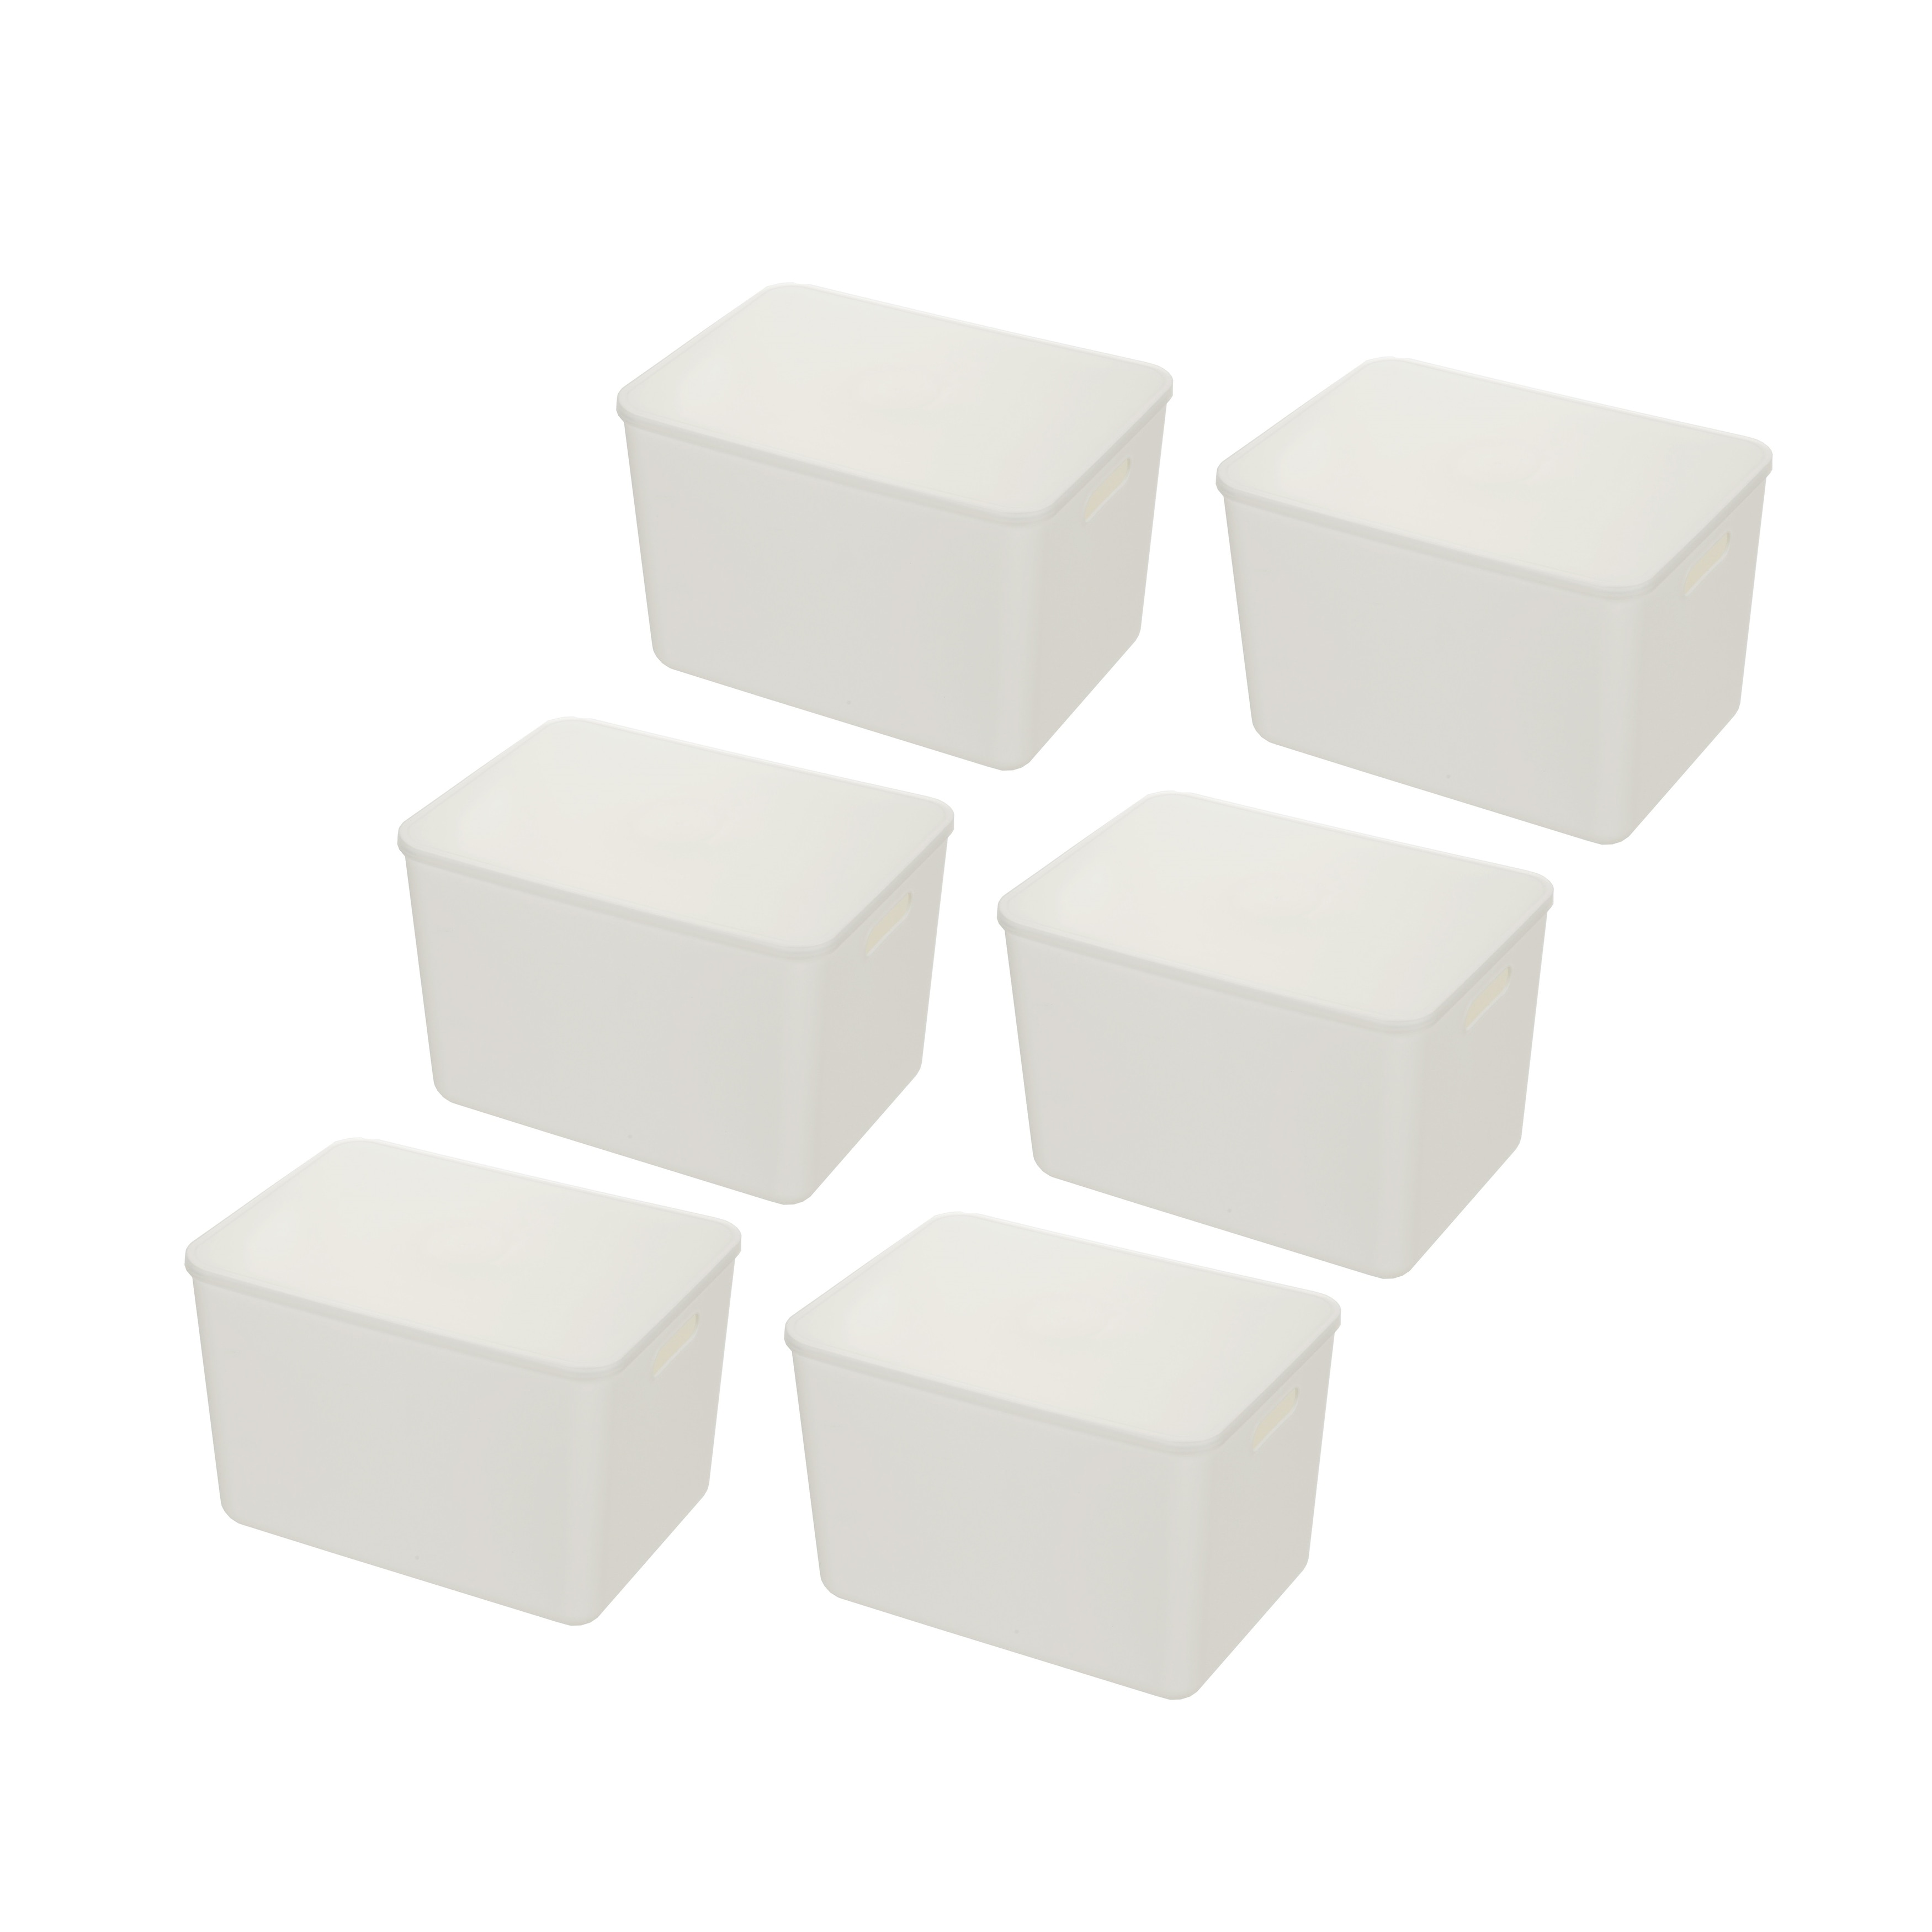  Tuanse 8 Pieces Plastic Storage Bins with Lids White Storage  Box with Handle Stackable Containers with Lids for Organizing White Bins  Small Storage Basket with Lid for Table (7.3 x